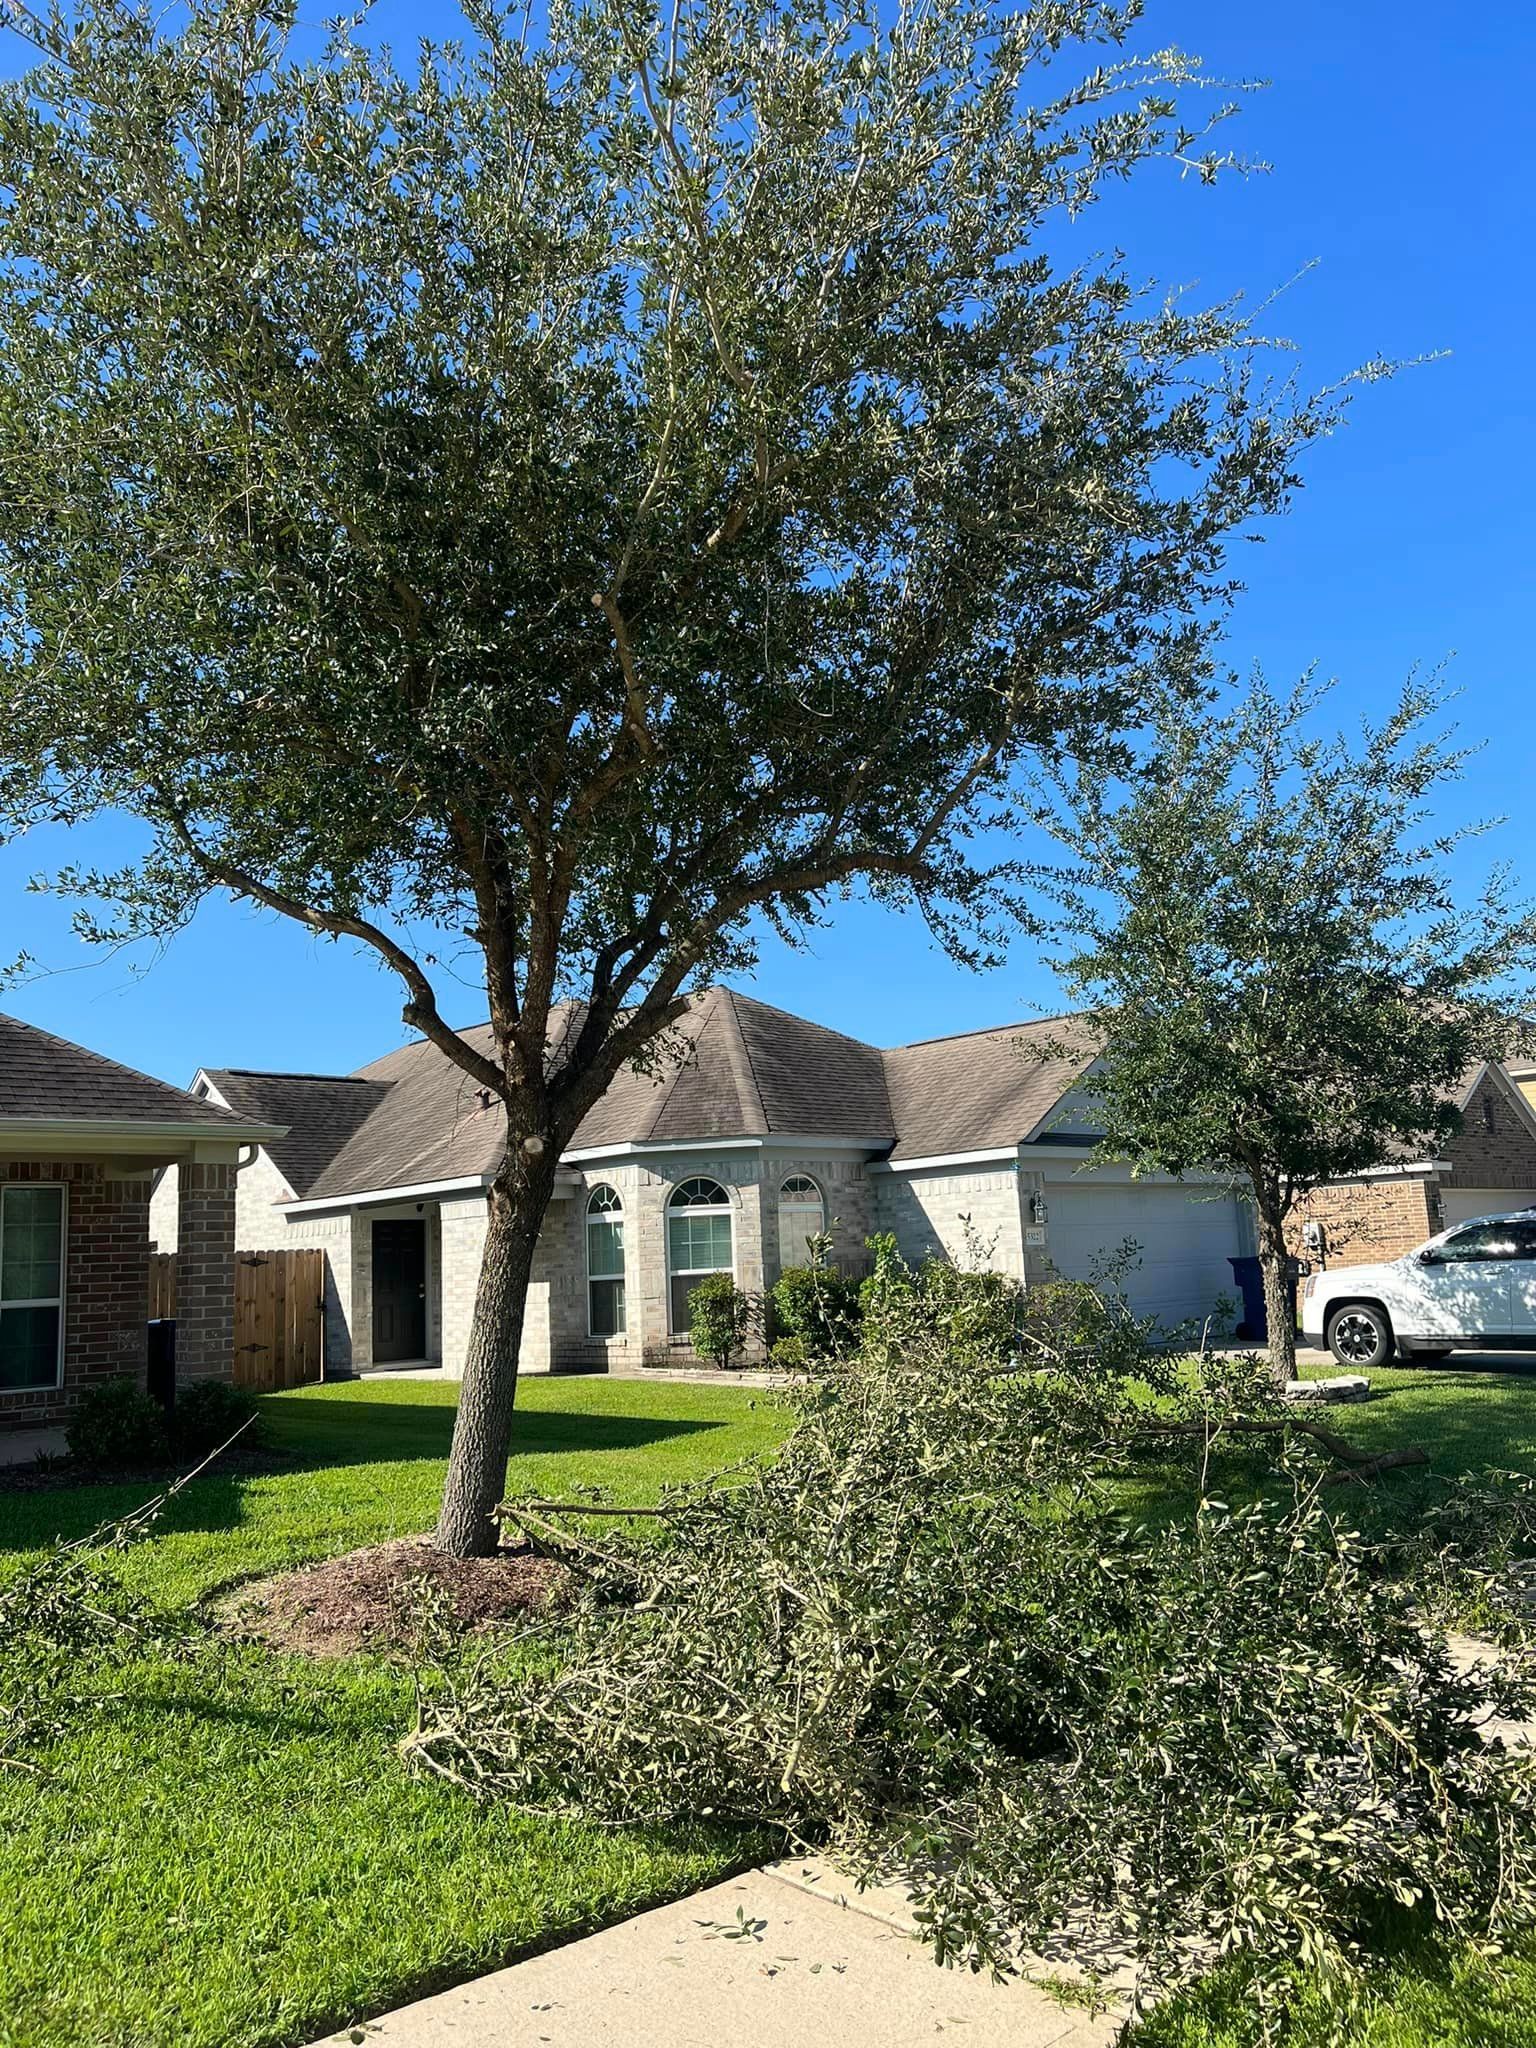 Tree Trimming for Bobby’s lawn services in Baytown, TX